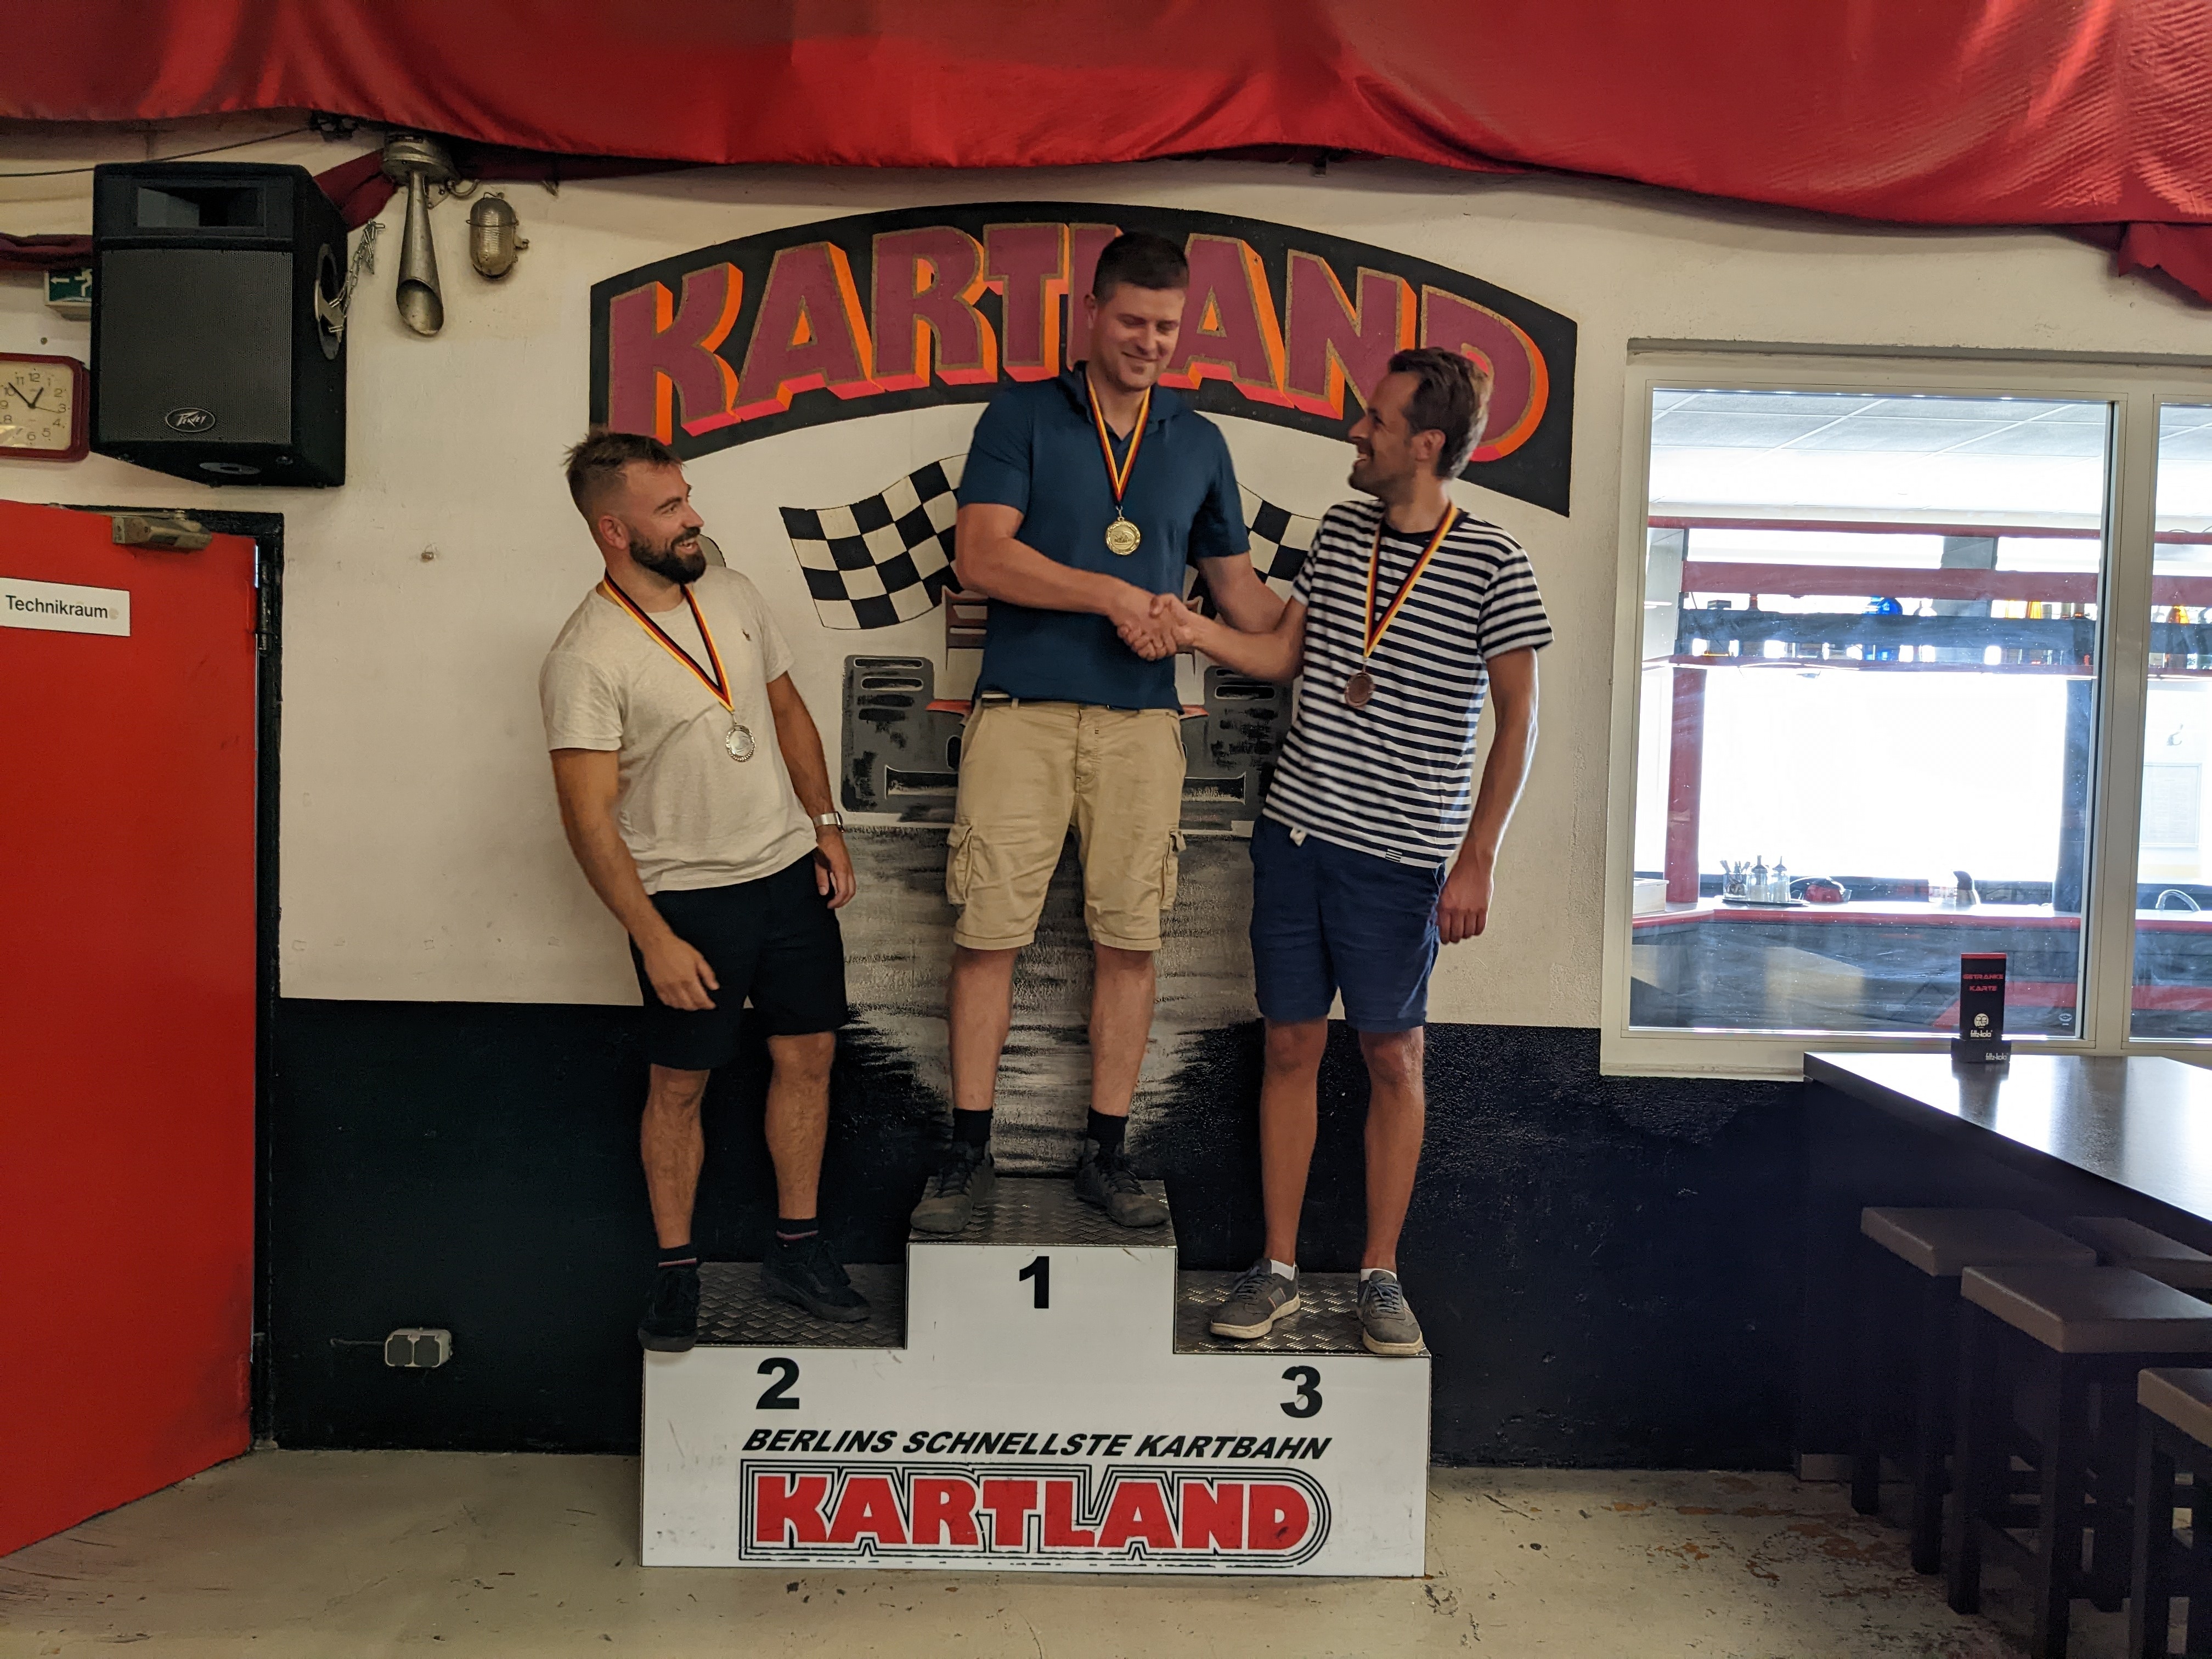 The podium from our grand prix - Tim in first, Kevin in second, and Mikael in third.